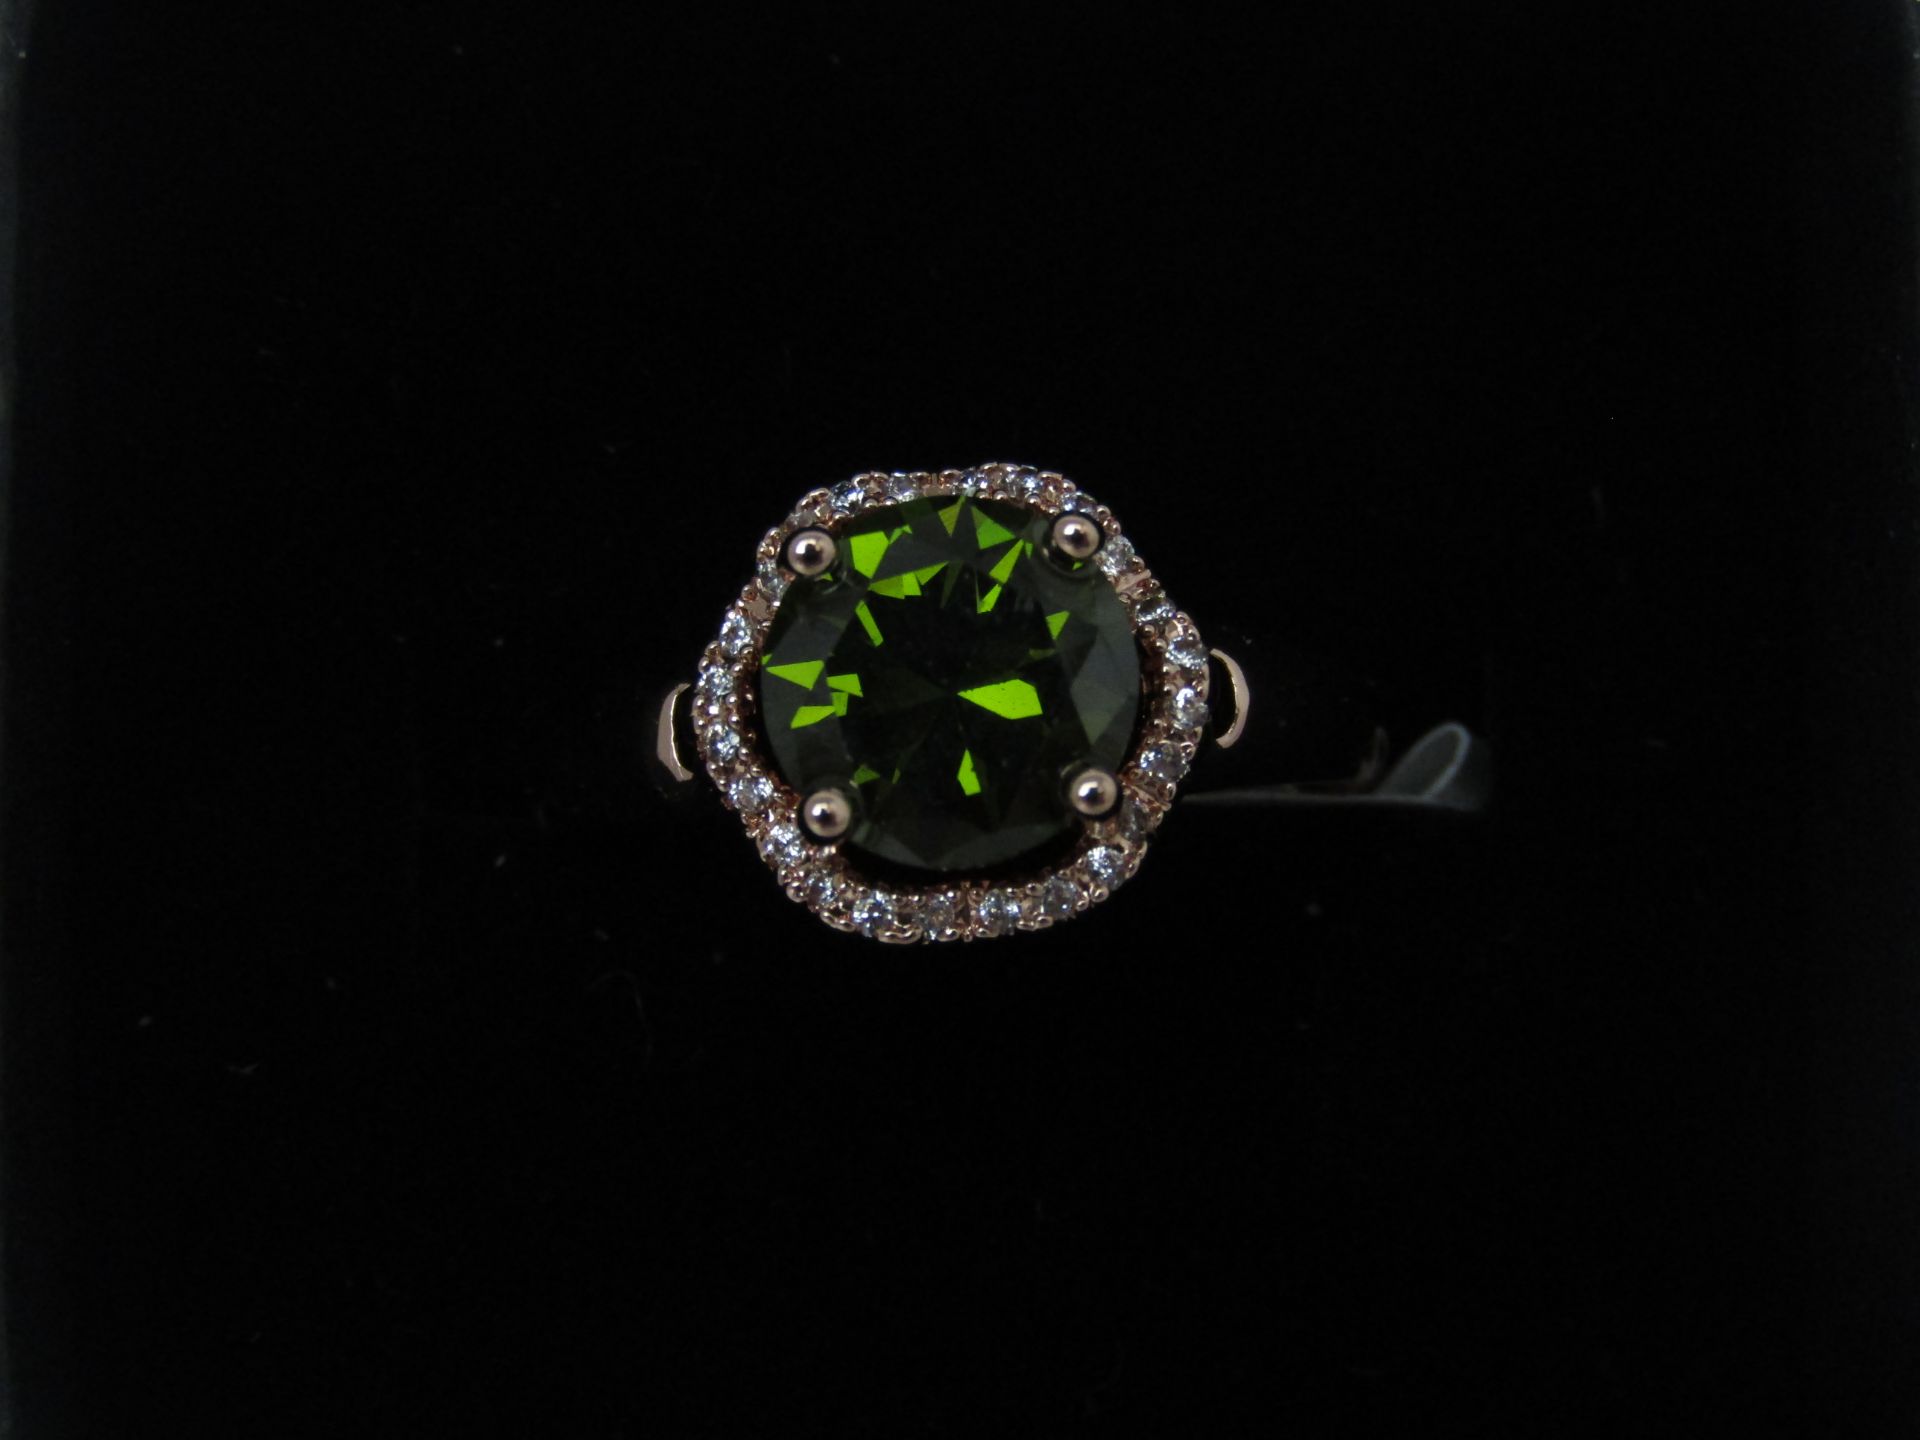 Fifth NYC Rose Gold Plated Halo Ring set with Green and Clear Swarovski Element Crystals. £65.00